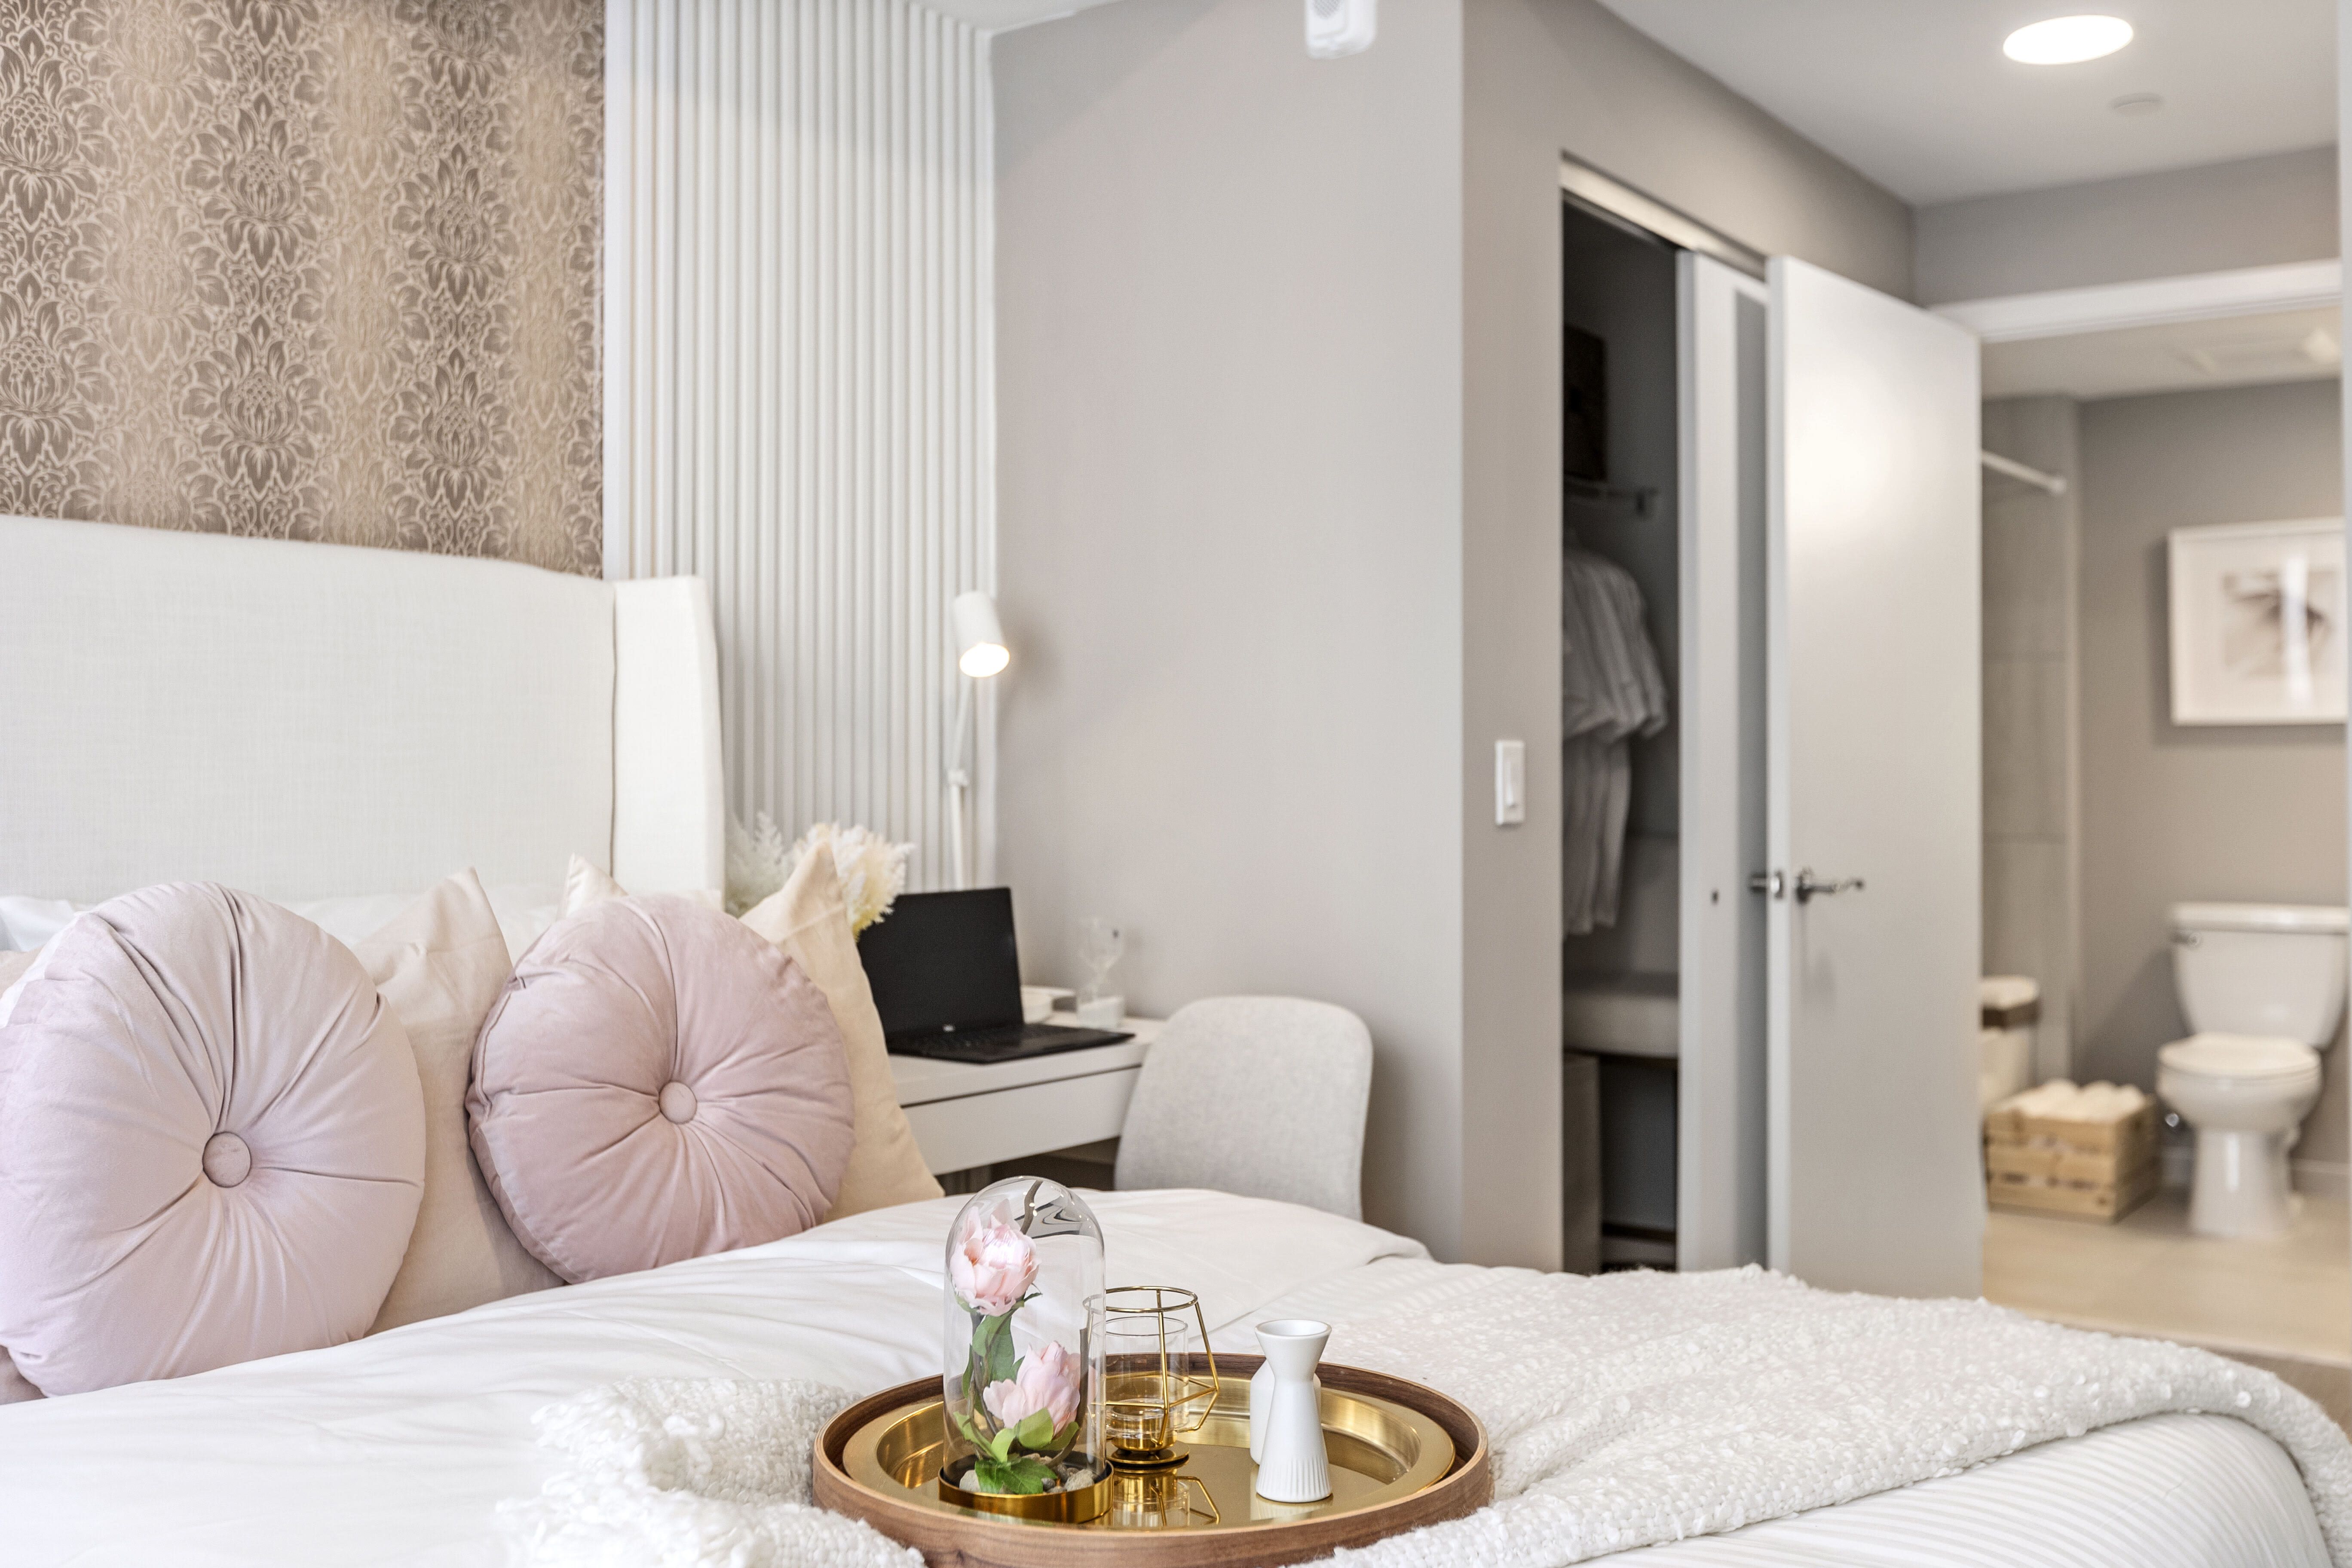 Discover a furnished apartment model bedroom at Pine Ridge in West Palm Beach, Florida, where natural light, modern furnishings, and wood-style flooring combine for a stylish living space